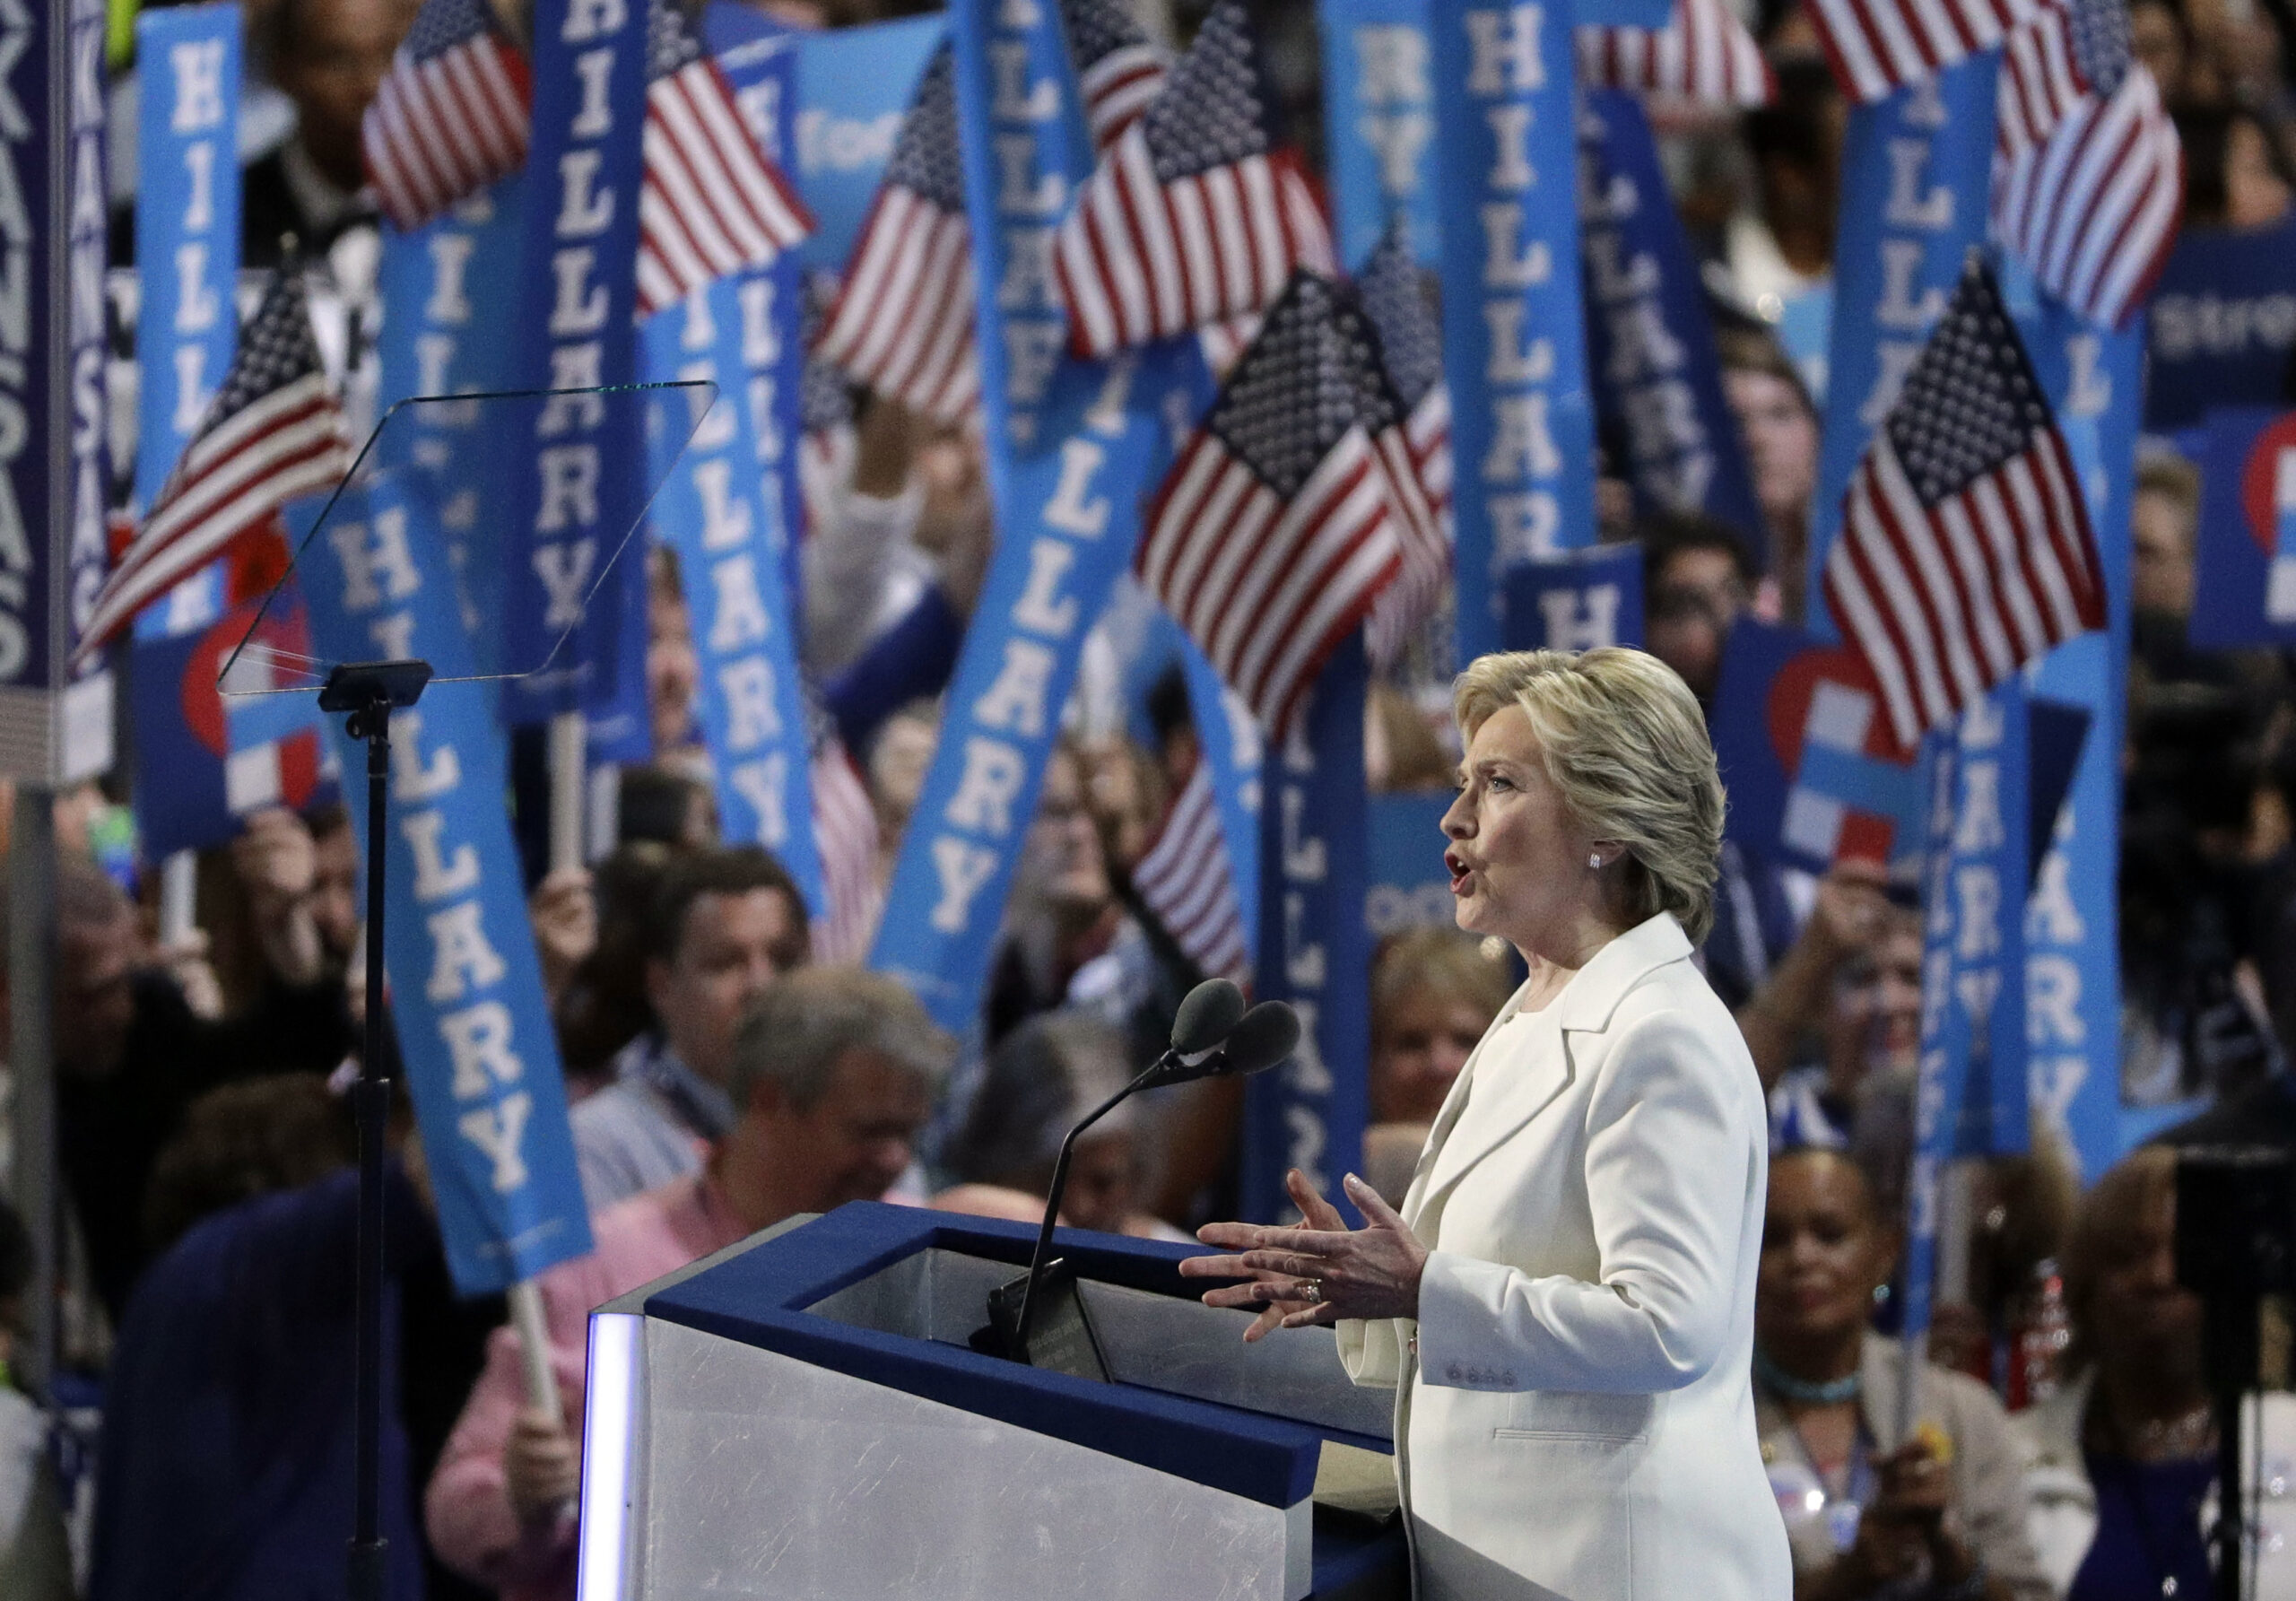 Hillary Clinton speaking at the 2016 Democratic National Convention